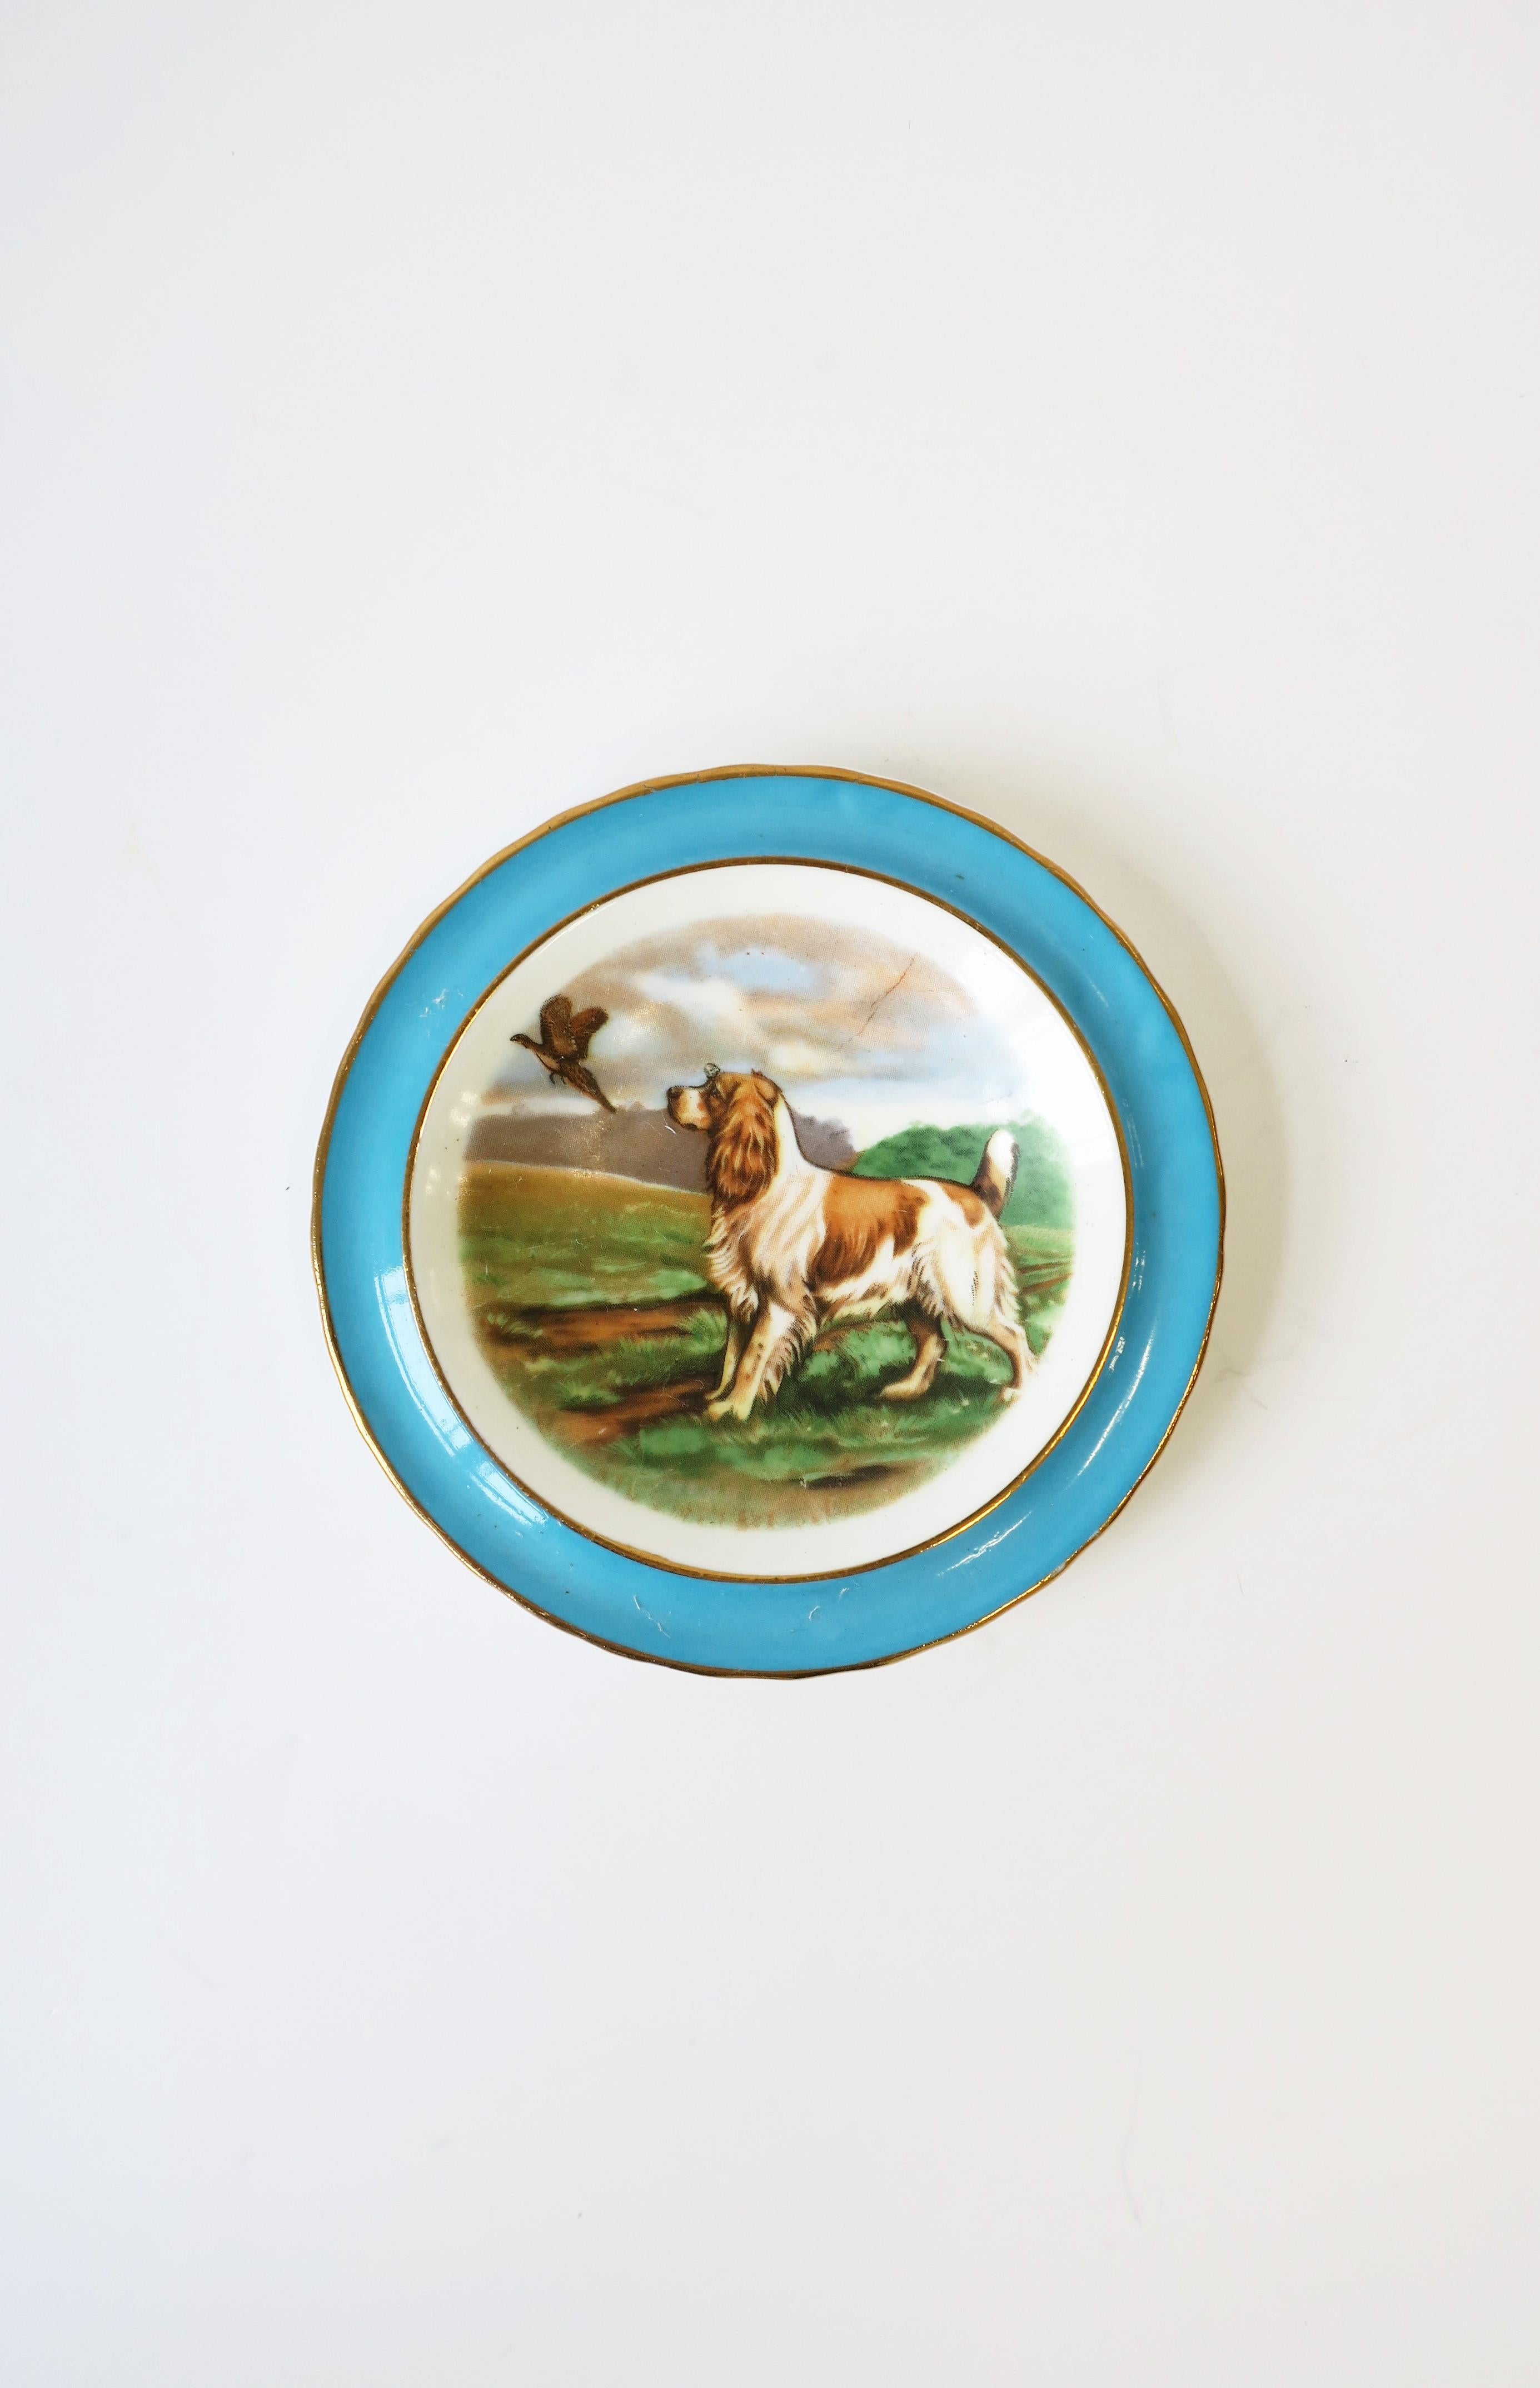 A very beautiful English blue and white porcelain jewelry dish with Spaniel dog and bird, circa early 20th century, England. A great piece to hold jewelry or other items on a vanity, desk, nightstand area, etc.

Piece measures: 4.13